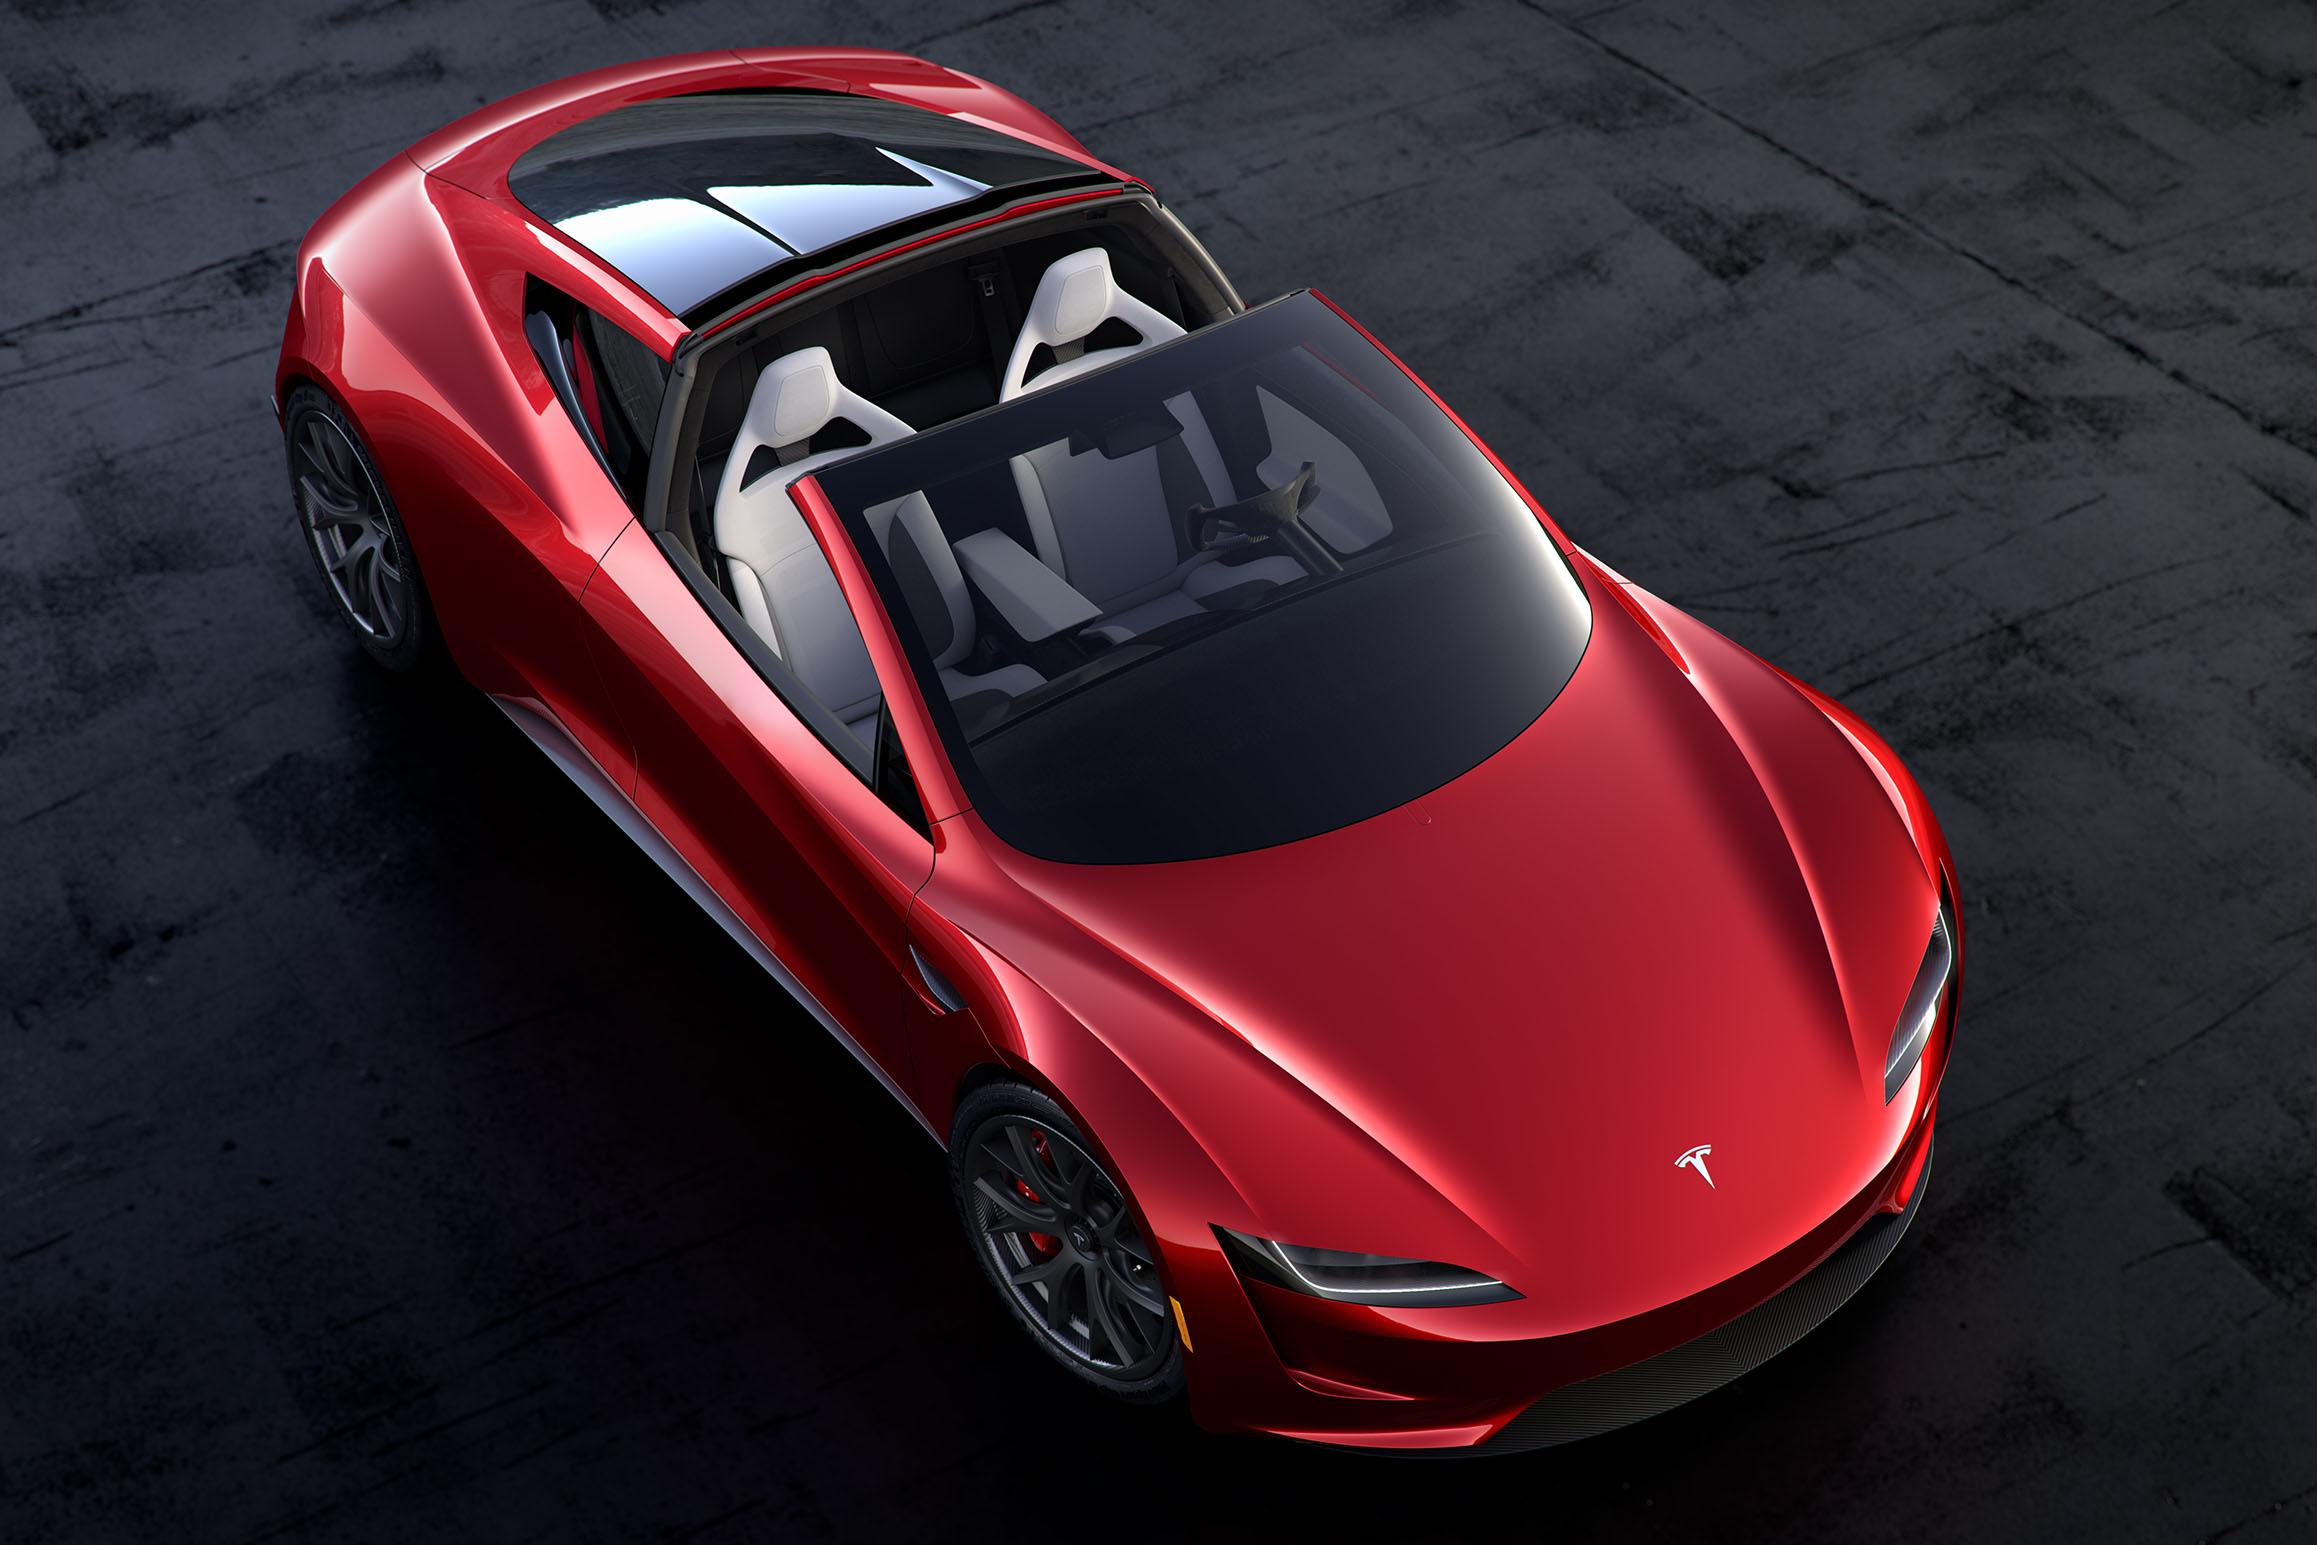 elon musk claims tesla roadster will have 0-60mph time under 1s